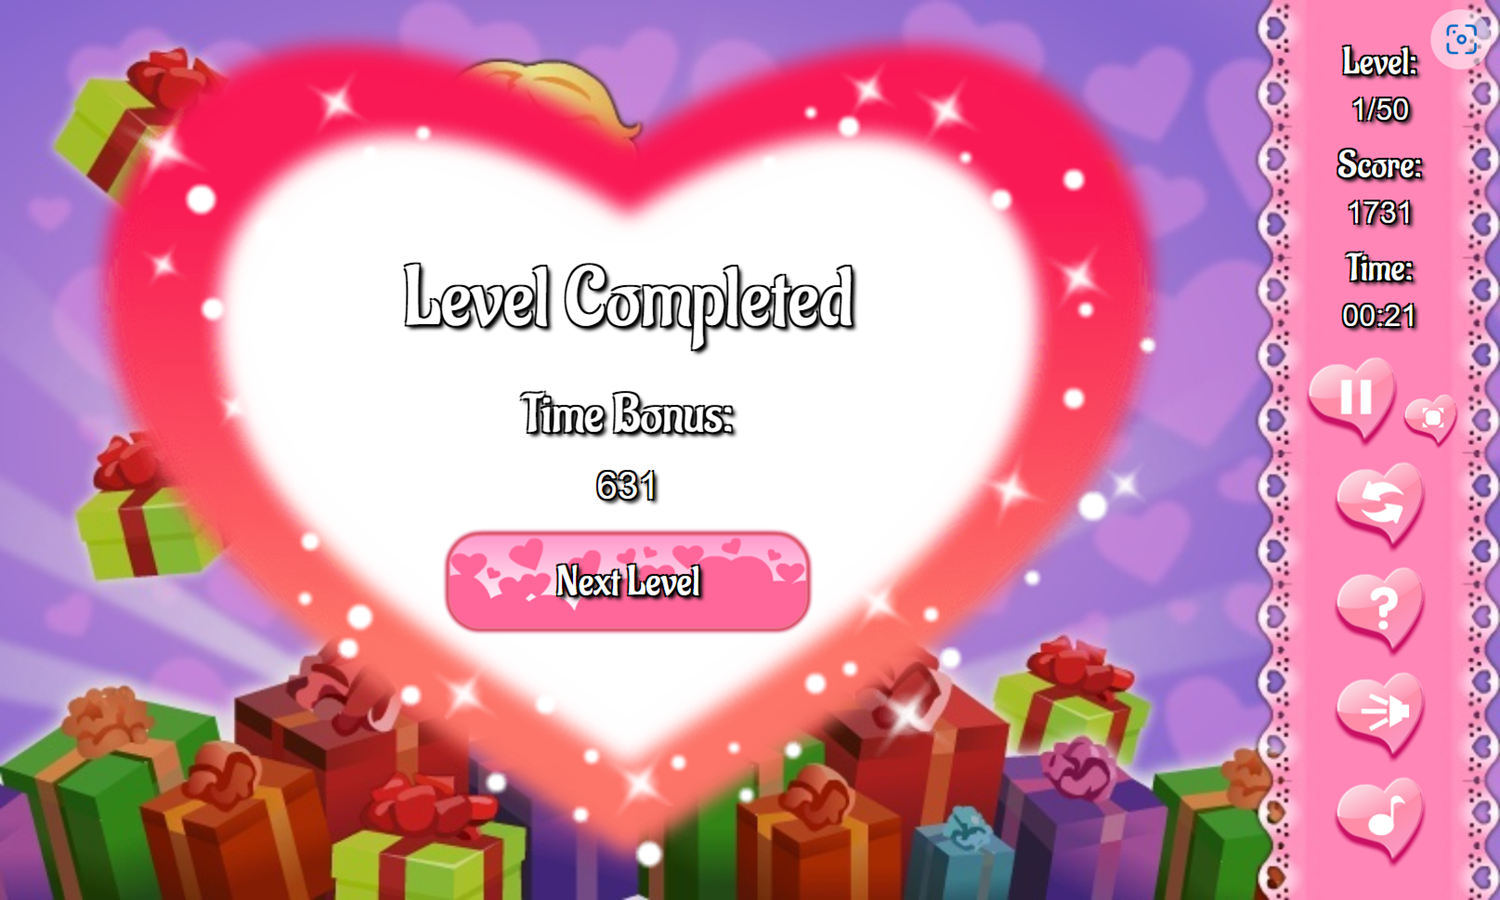 Mahjongg Valentine Game Level Completed Screenshot.